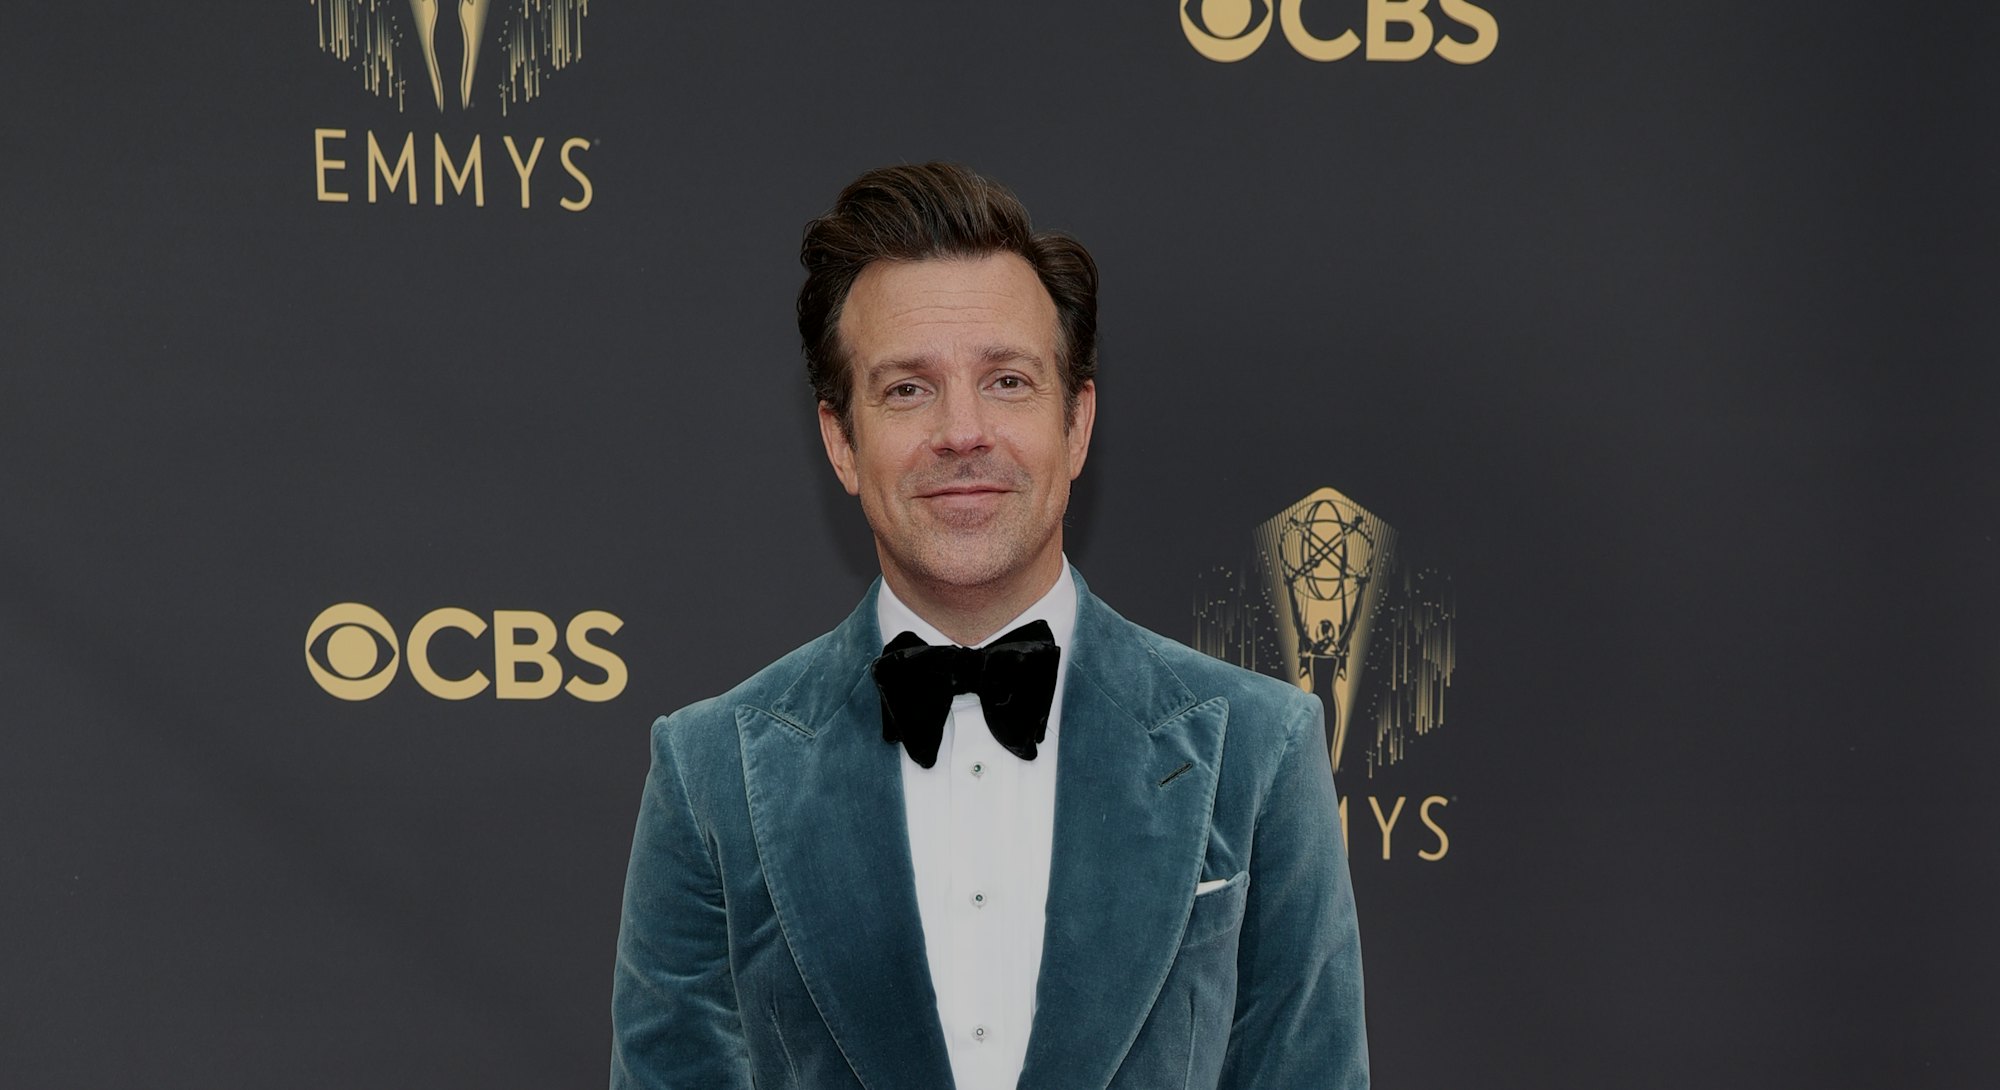 LOS ANGELES, CALIFORNIA - SEPTEMBER 19: Jason Sudeikis attends the 73rd Primetime Emmy Awards at L.A...